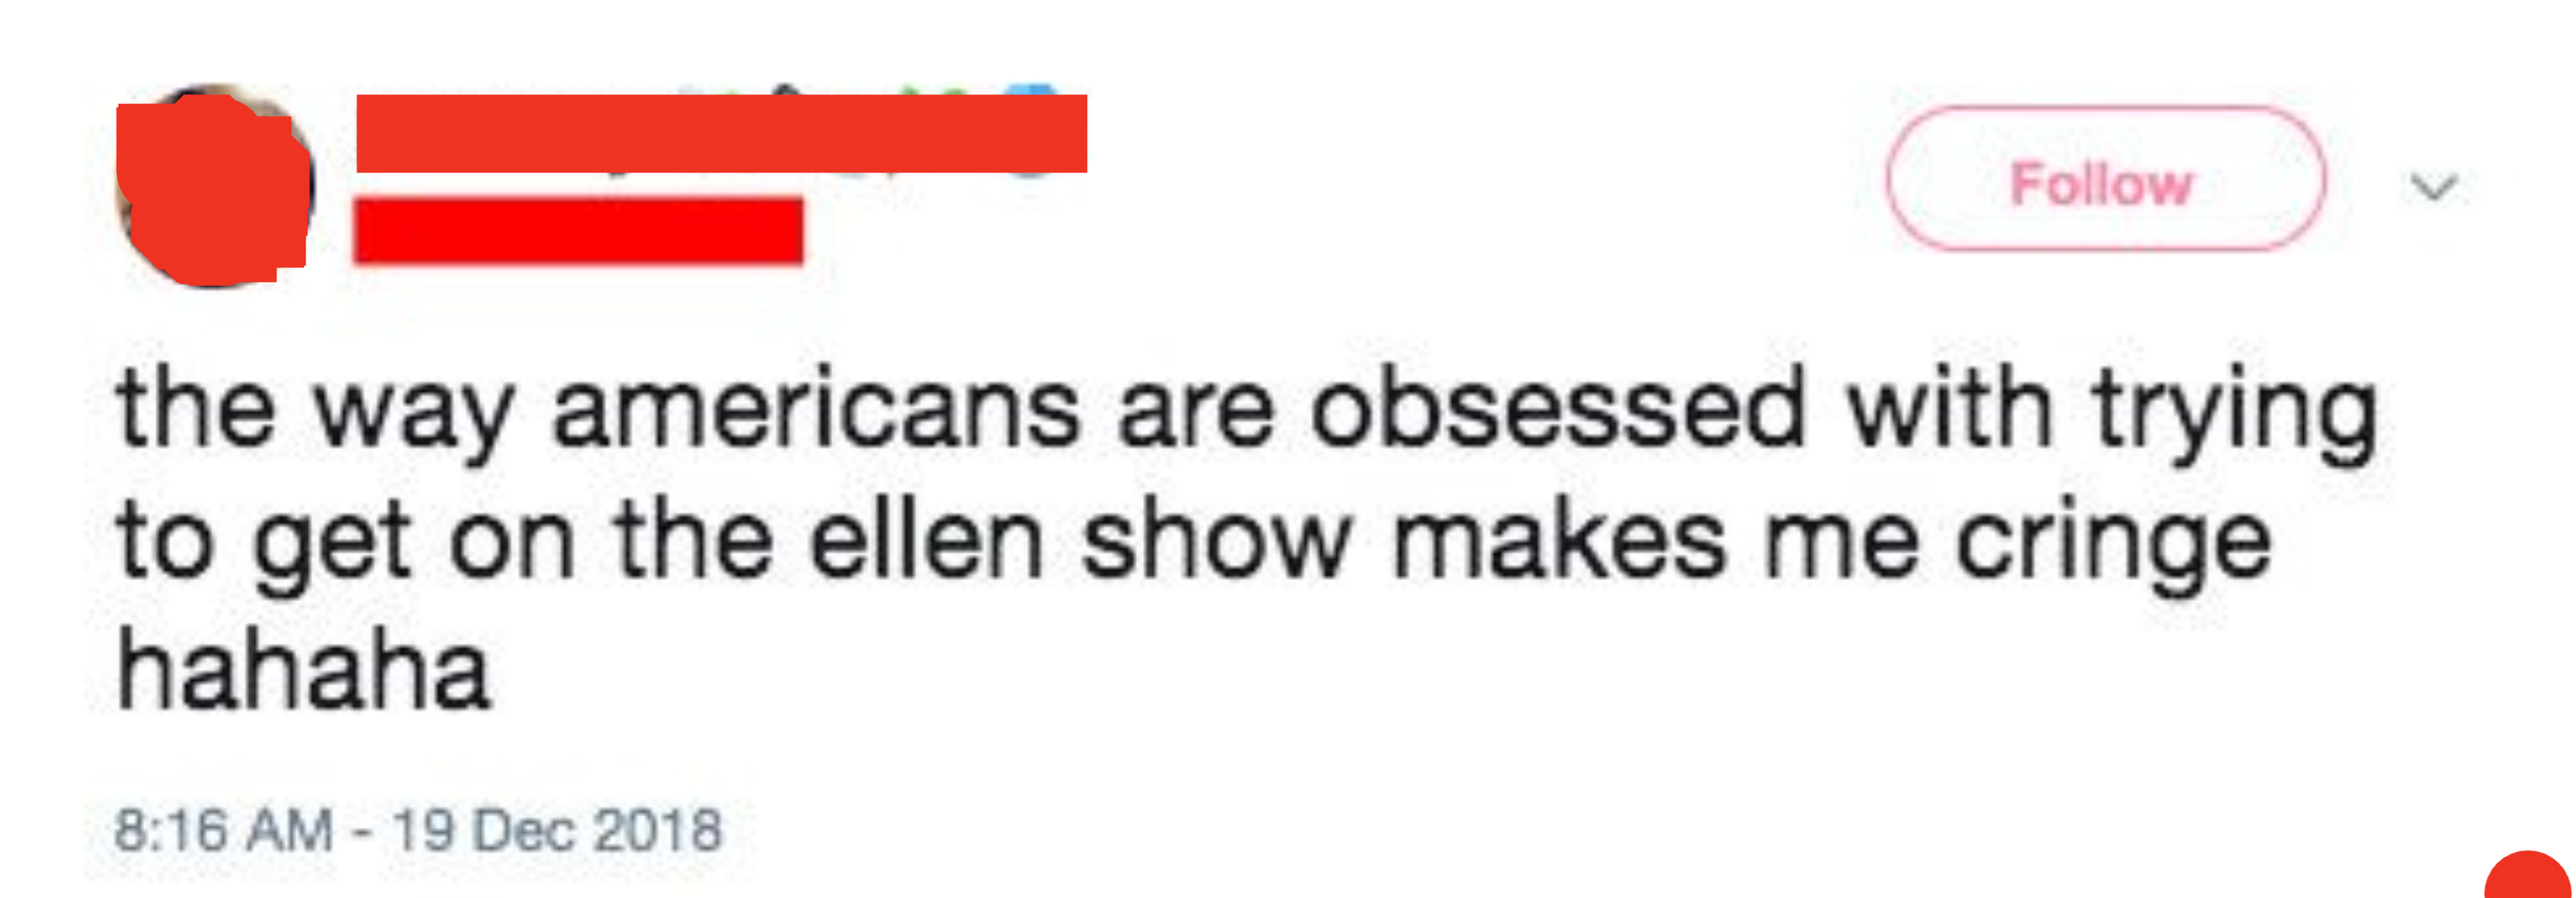 the way americans are obsessed with trying to get on the ellen show makes me cringe hahaha